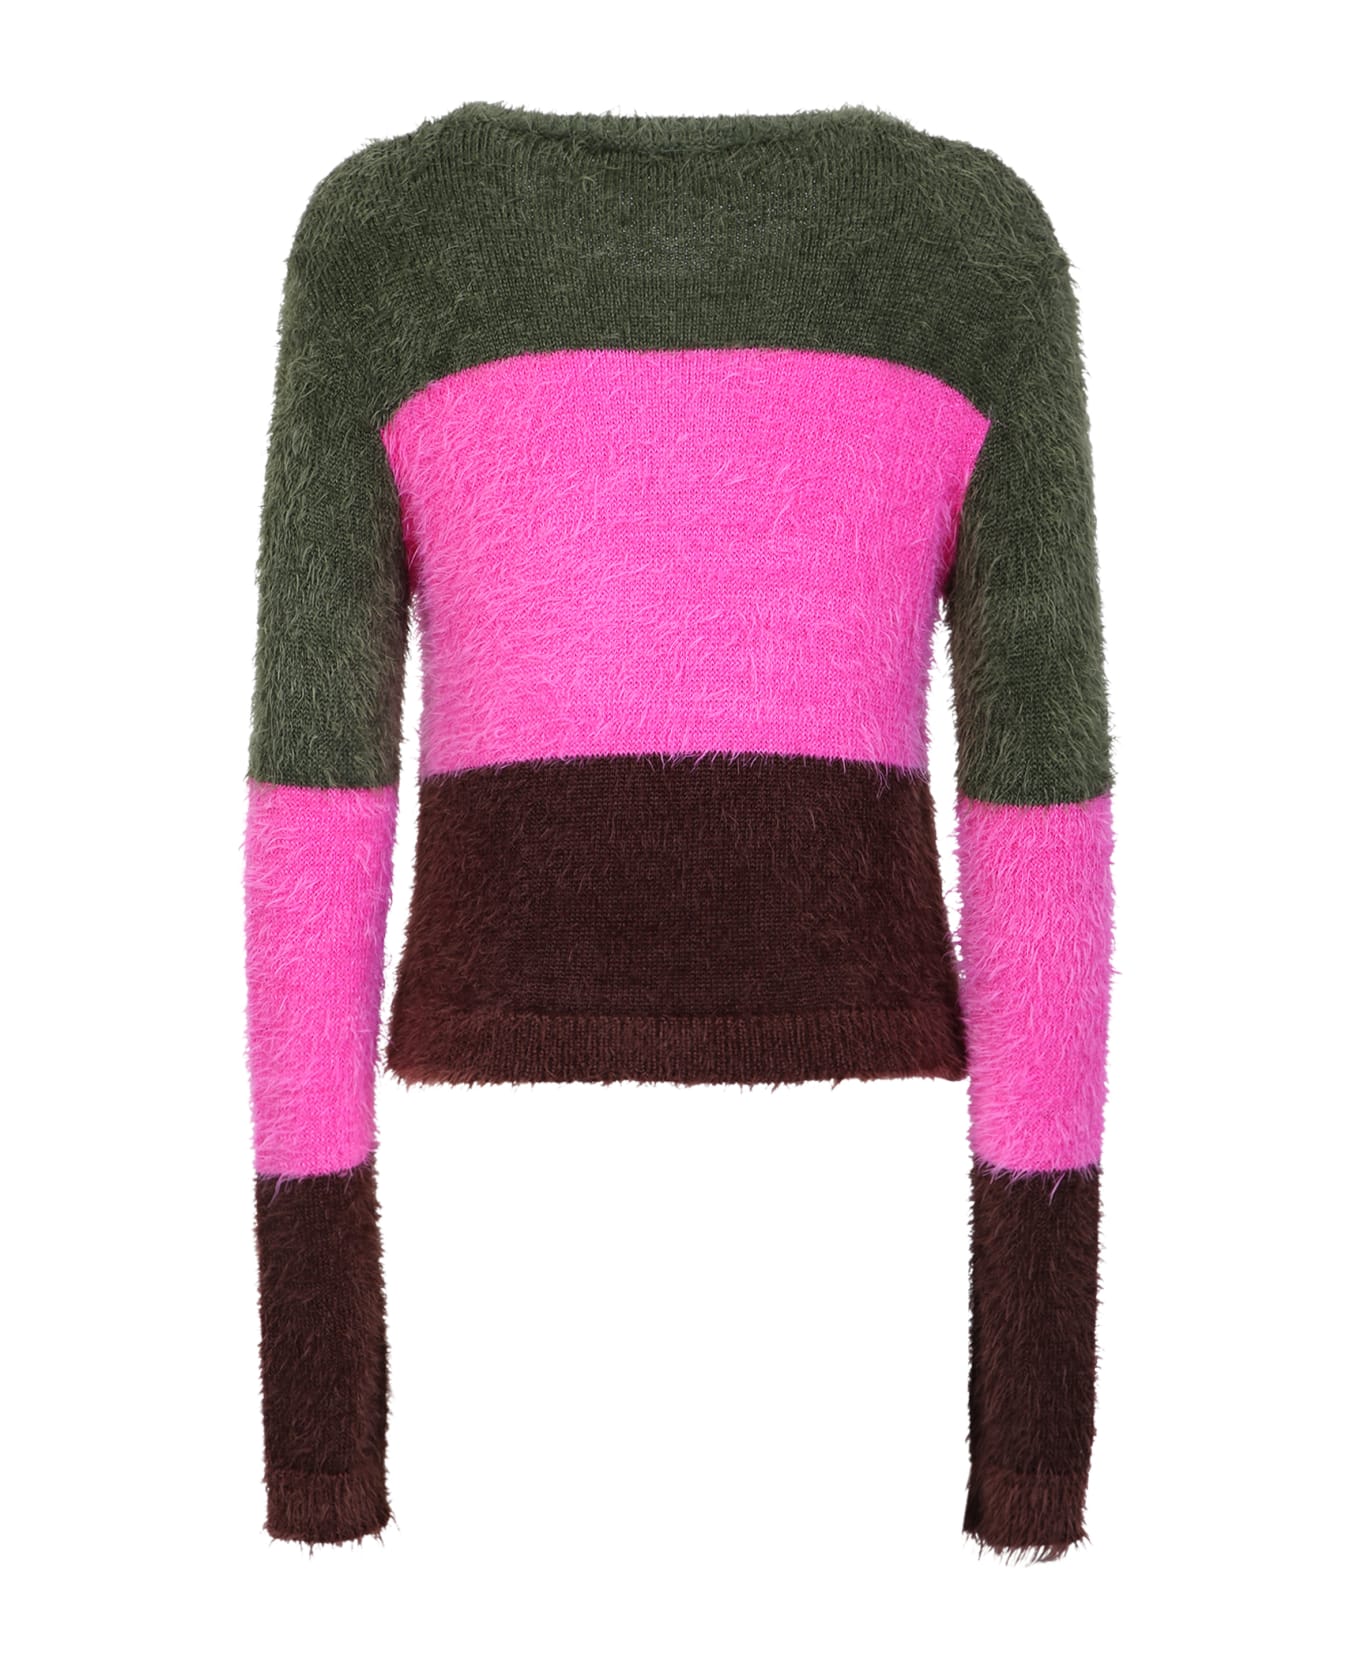 Dsquared2 Brown And Pink Fuzzy Stripes Sweater - Brown ニットウェア